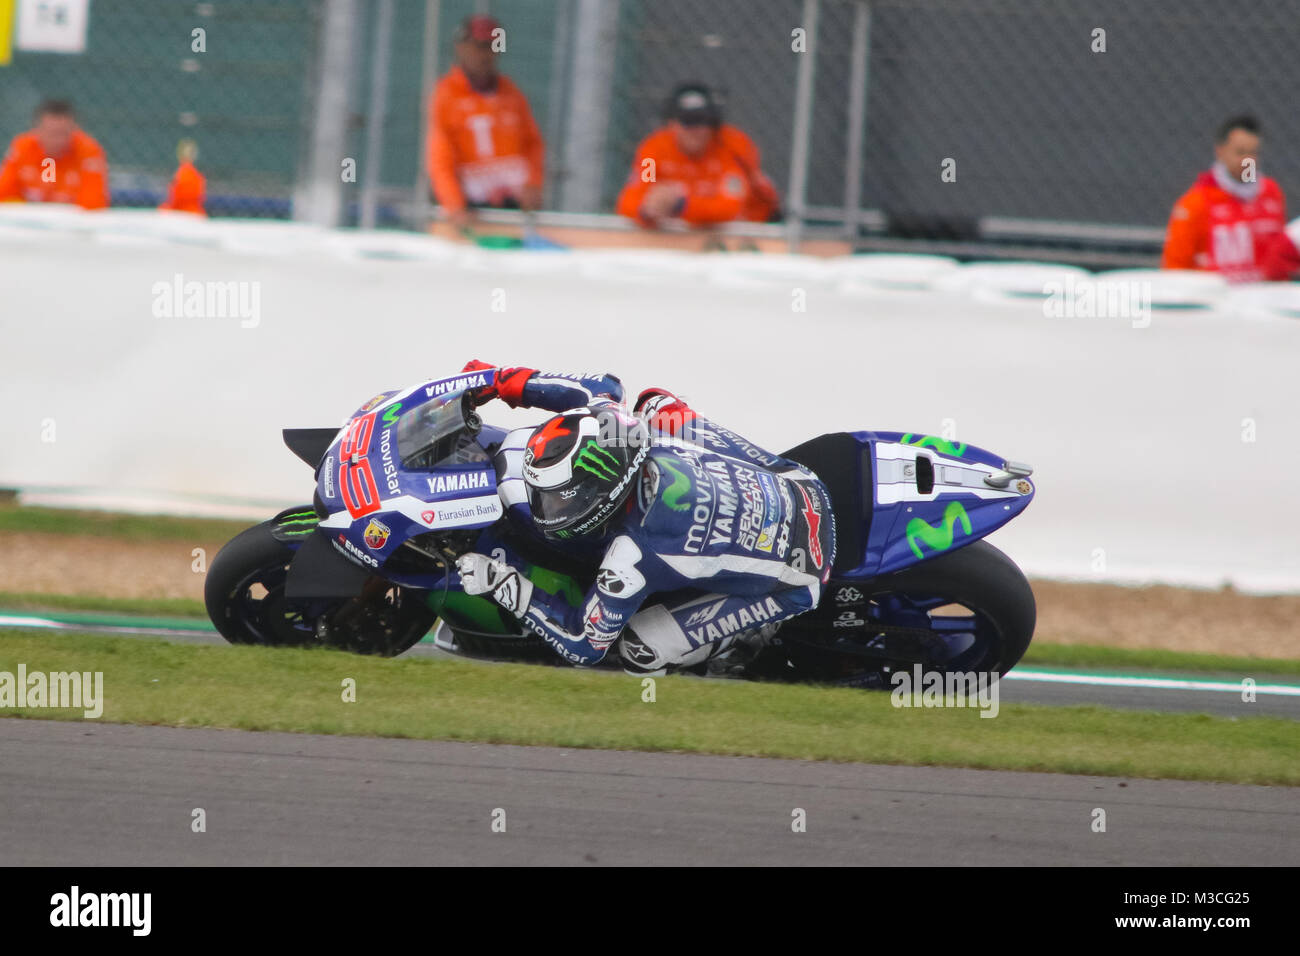 Jorge Lorenzo on the way to setting a quick time in qualifying at the MotoGP British Grand Prix 2016 Stock Photo